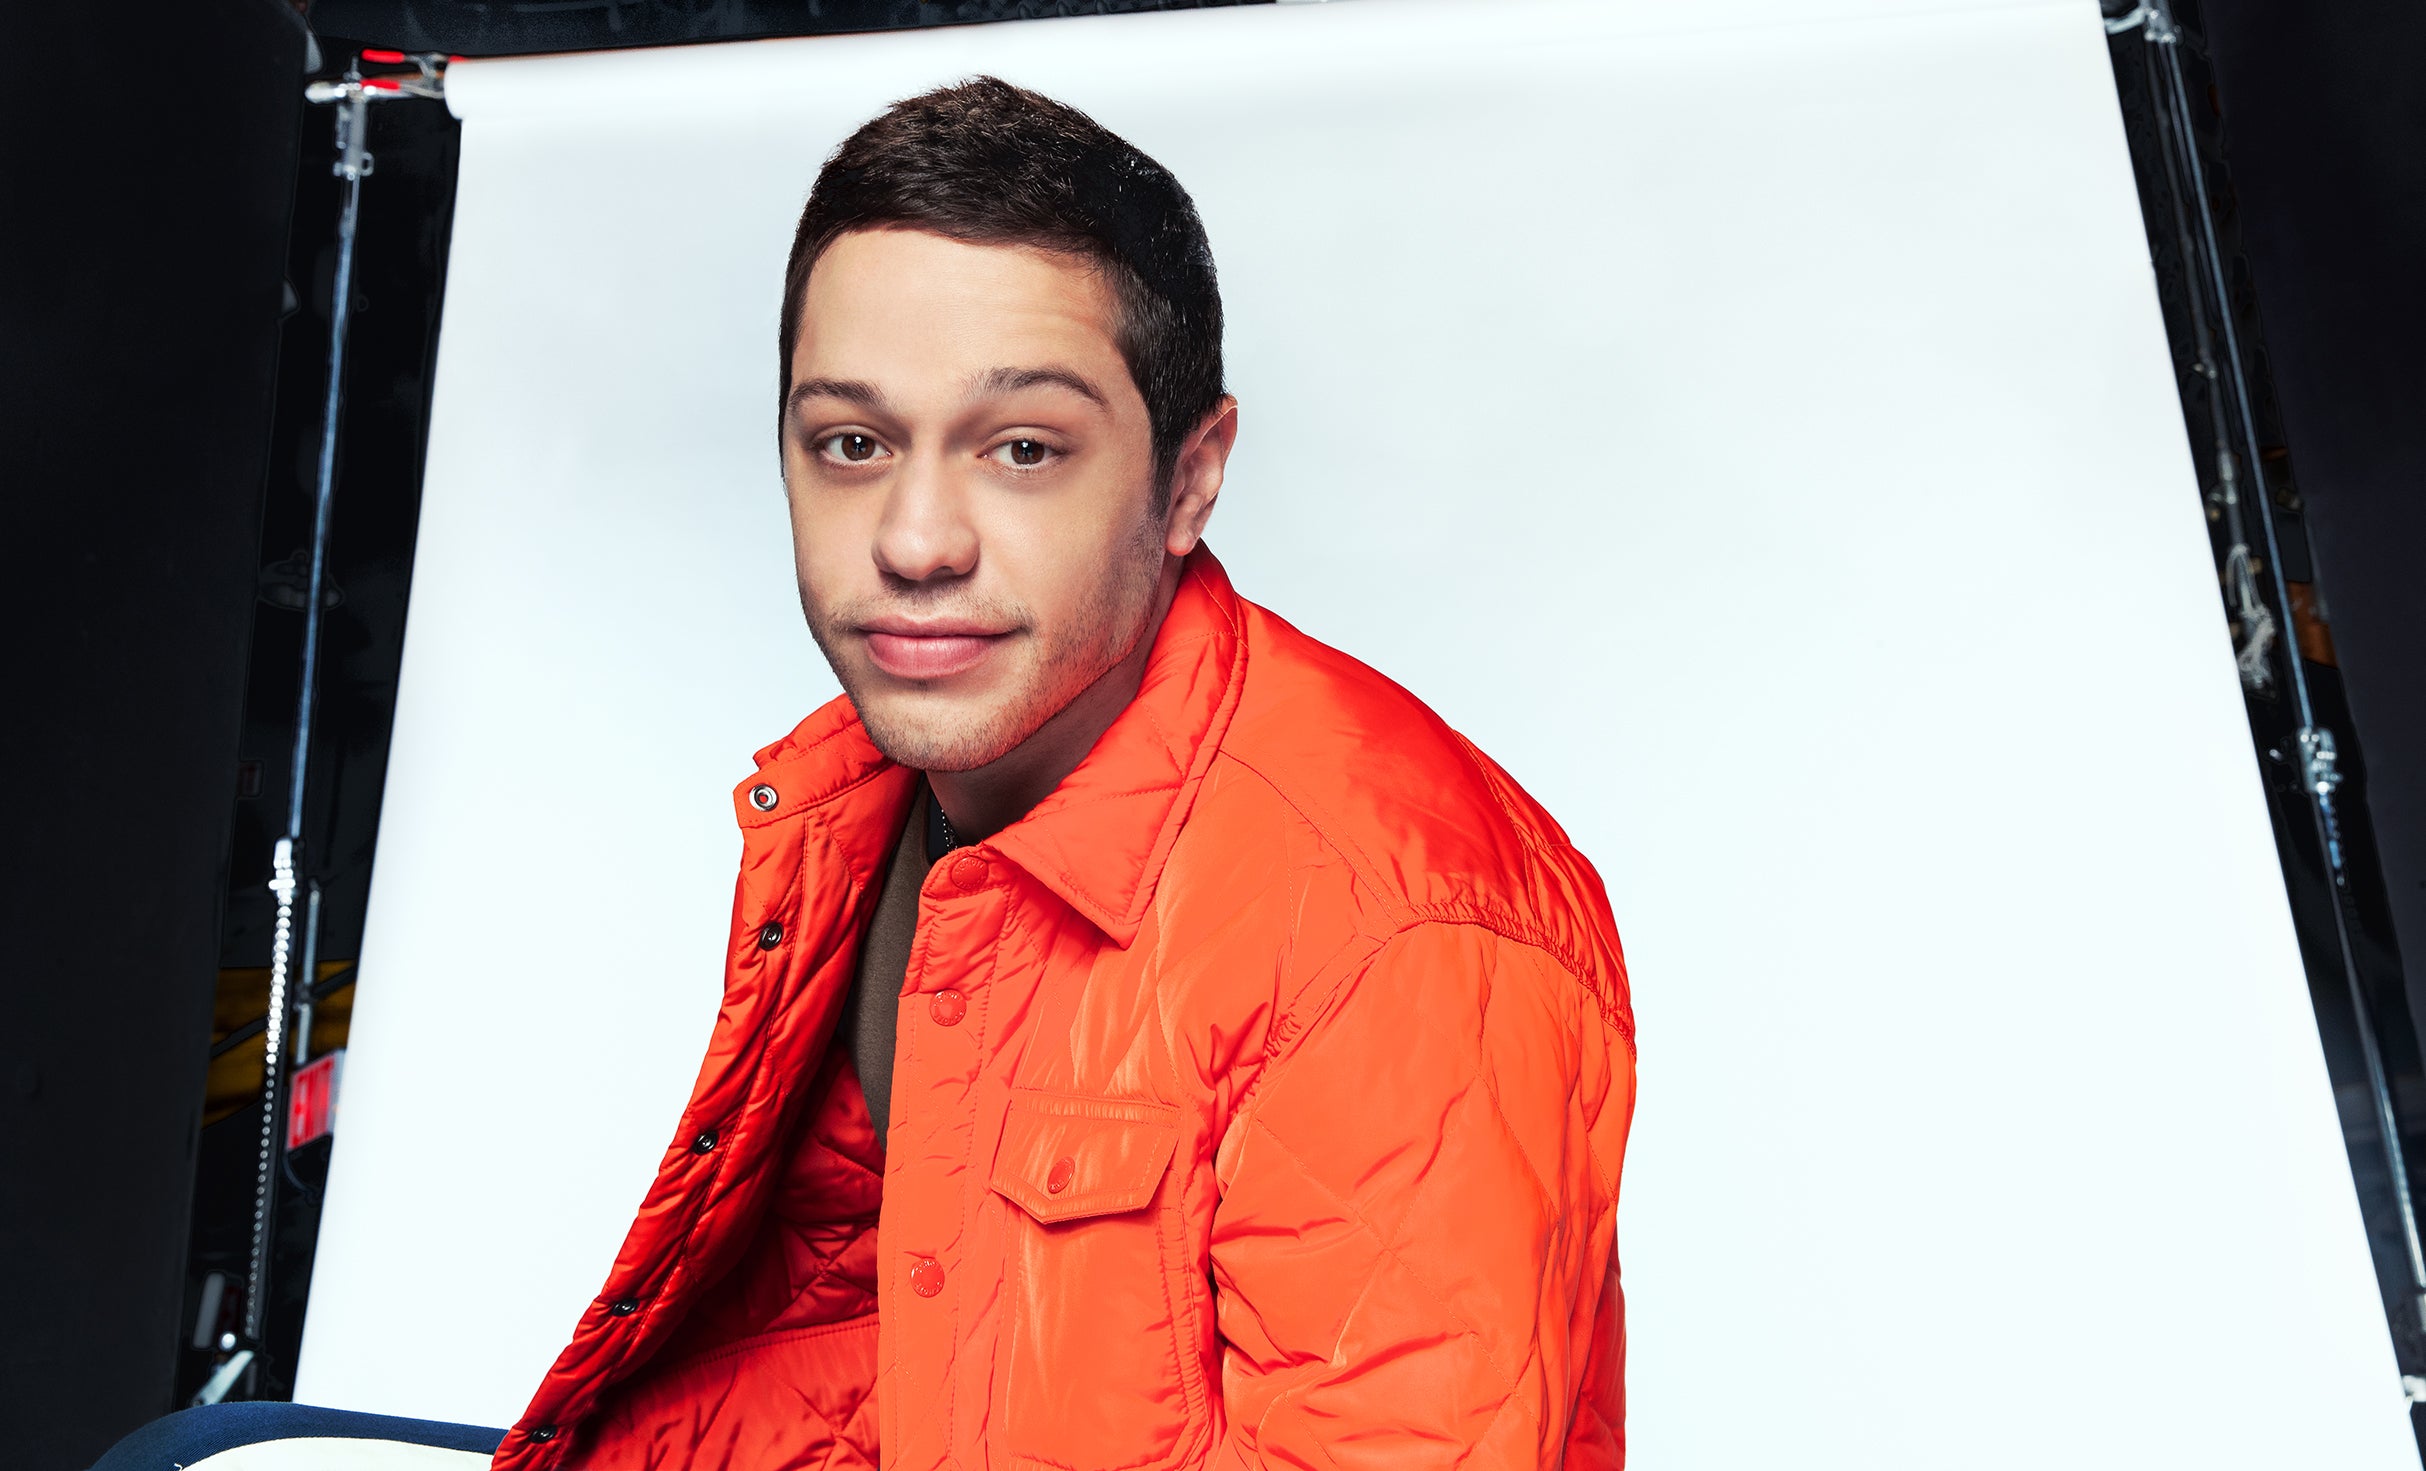 Pete Davidson Prehab Tour free pre-sale password for early tickets in Niagara Falls